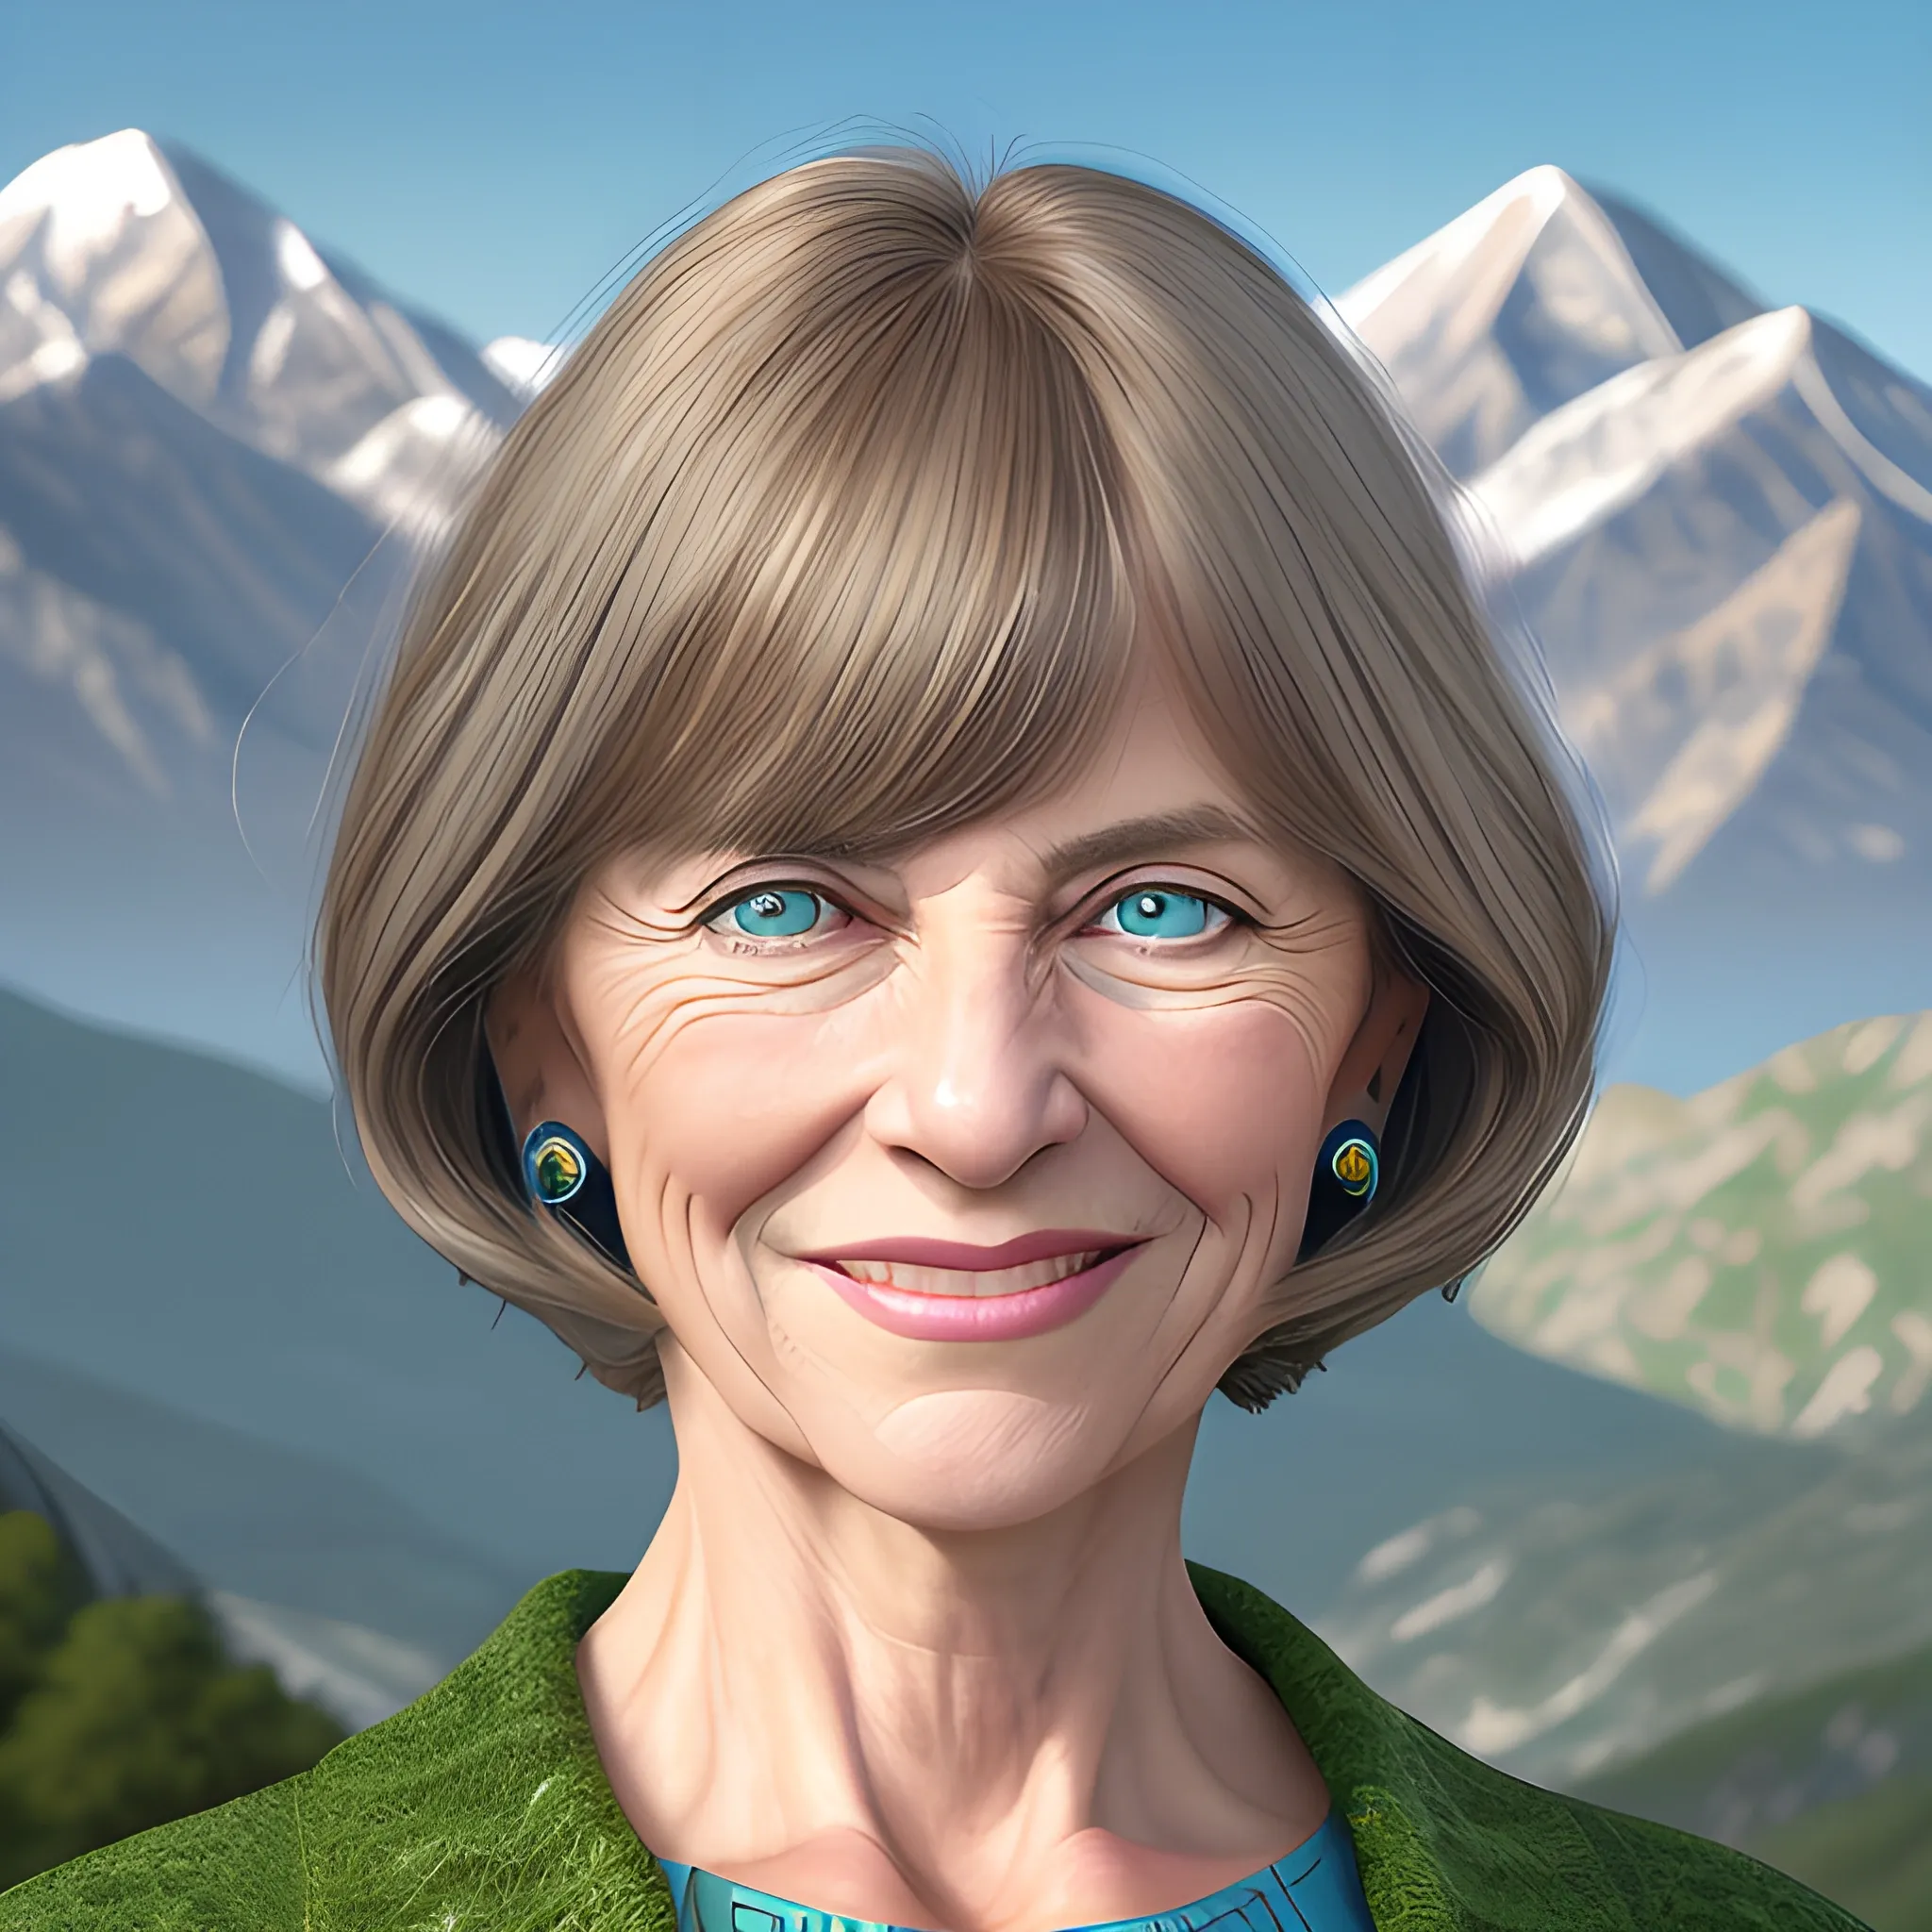 portrait of a midle aged woman, dark blond hair with timeless bob with bangs, attractive, symmetrical, kind, strong, smiling, highly detailed portrait, bright open green/blue eyes, mont canigou landscape in background, realistic digital art 